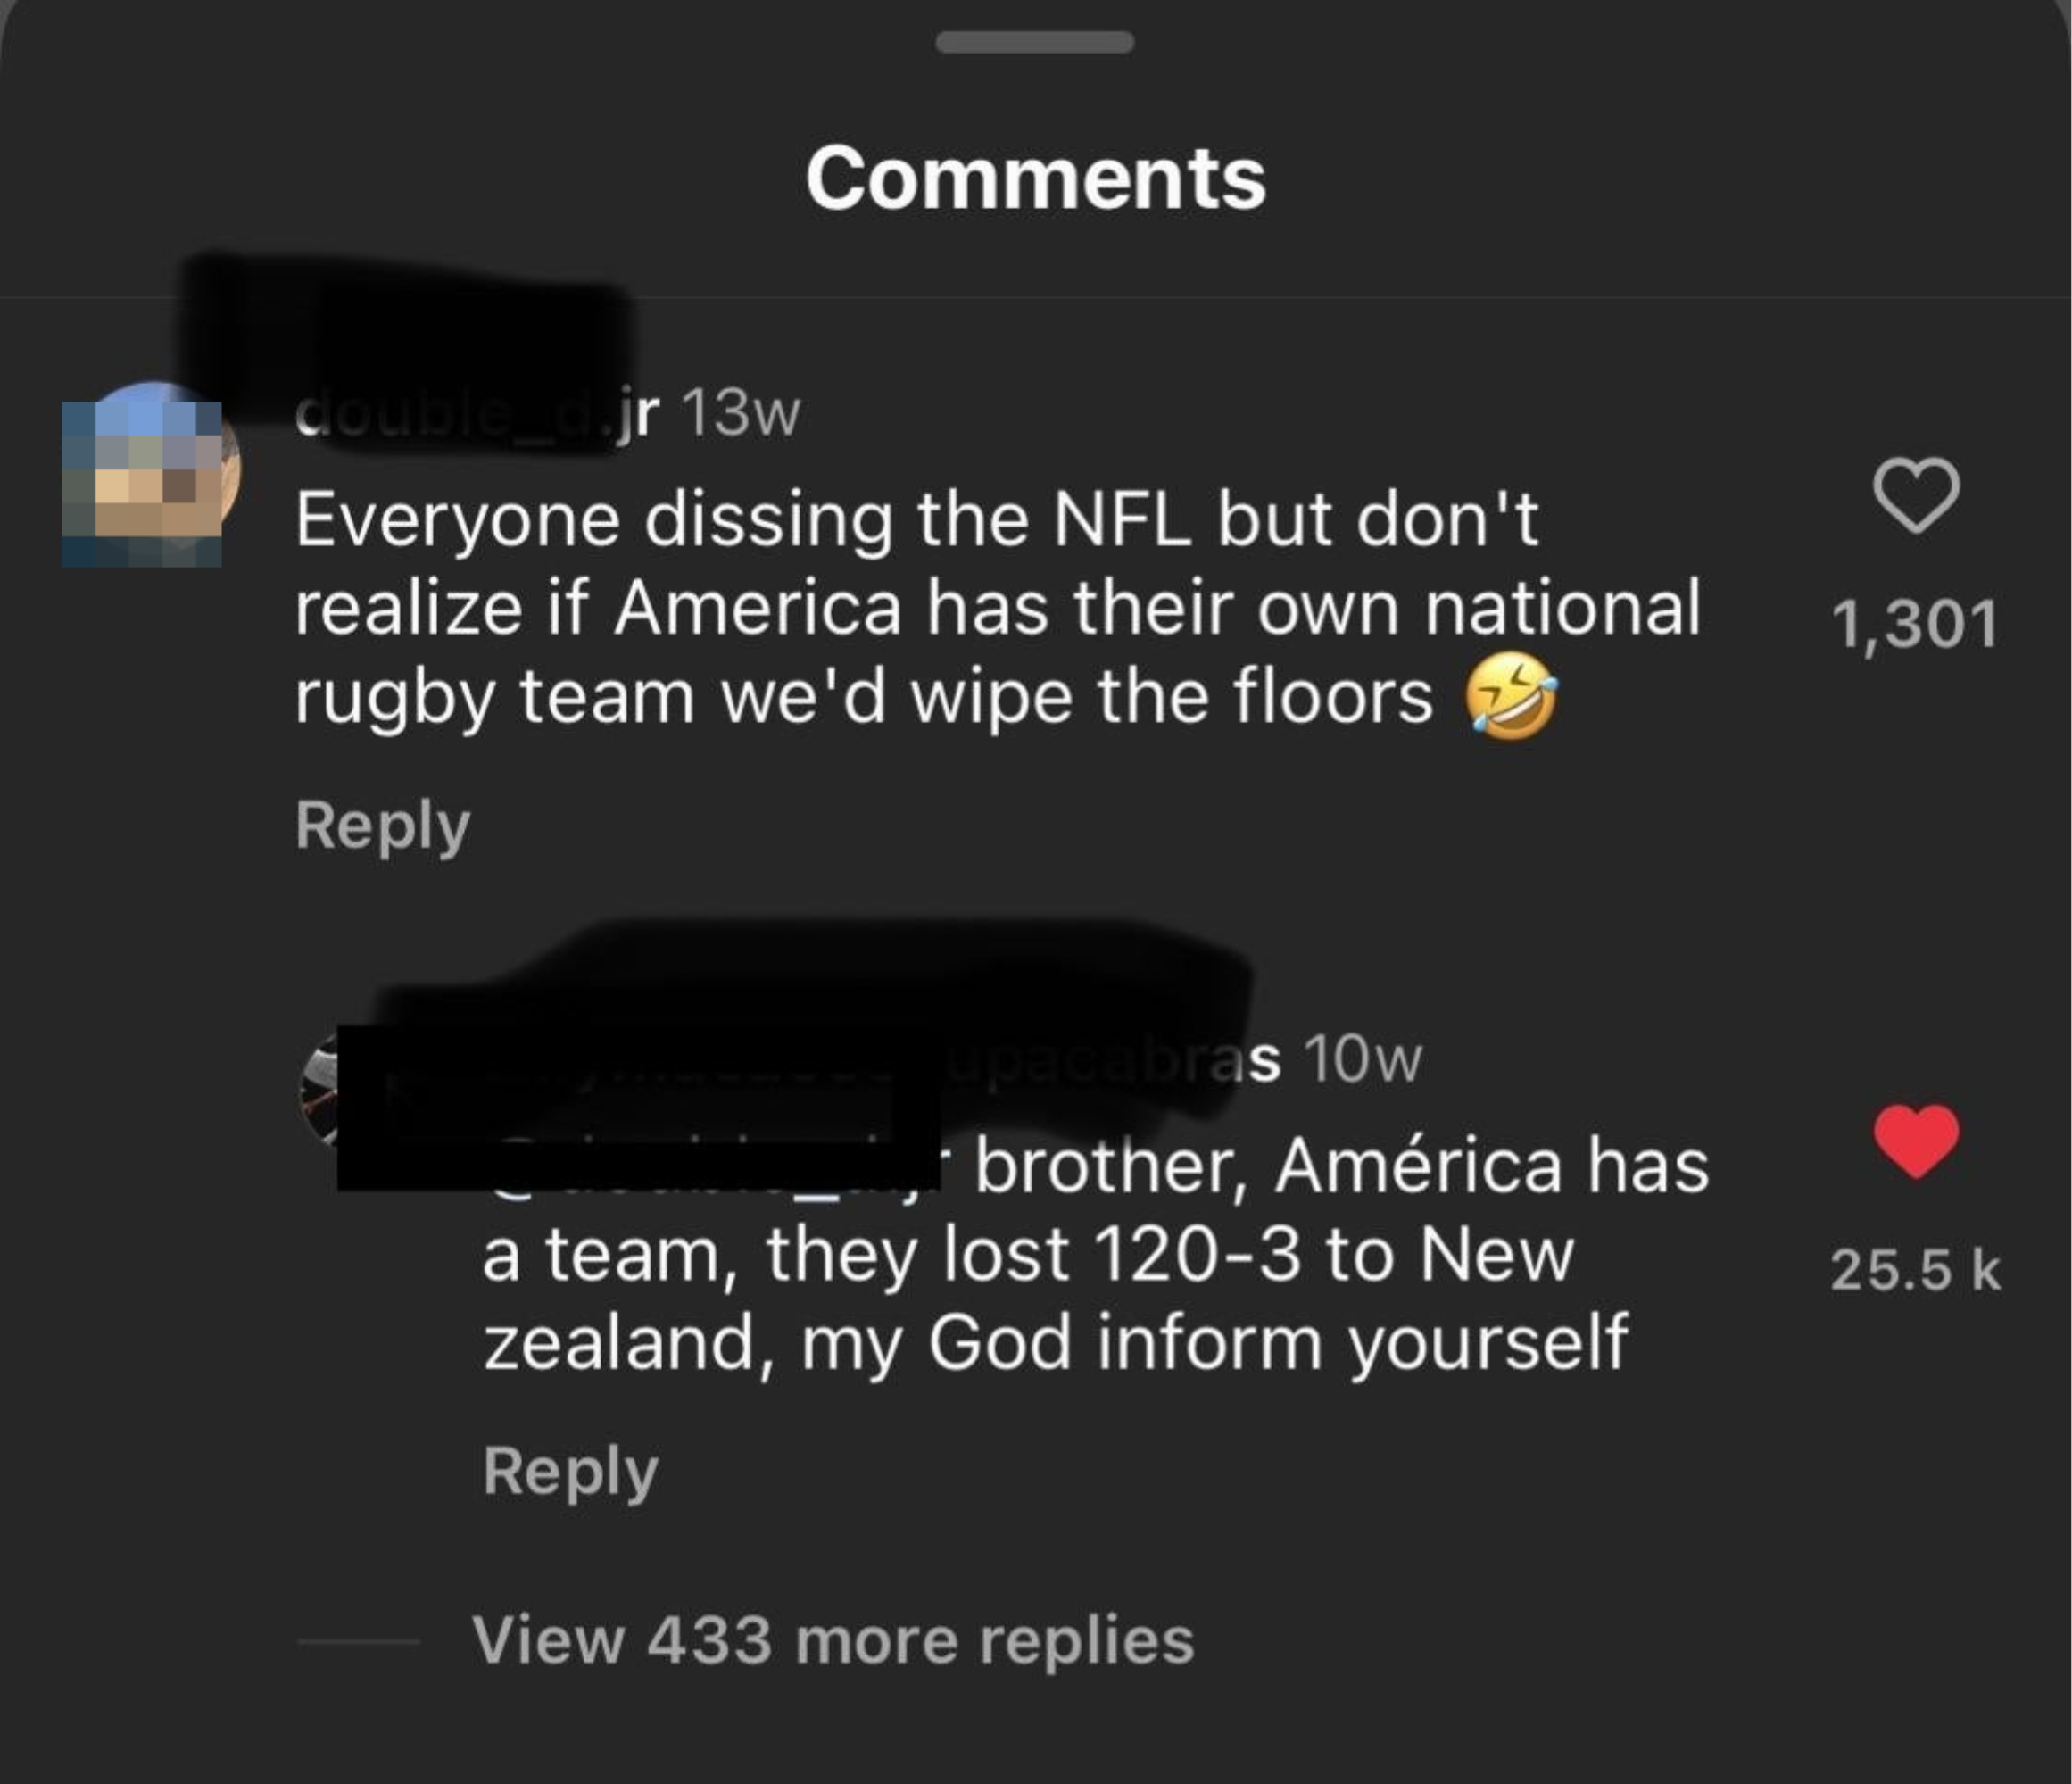 The image shows two social media comments joking about American soccer teams compared to the NFL